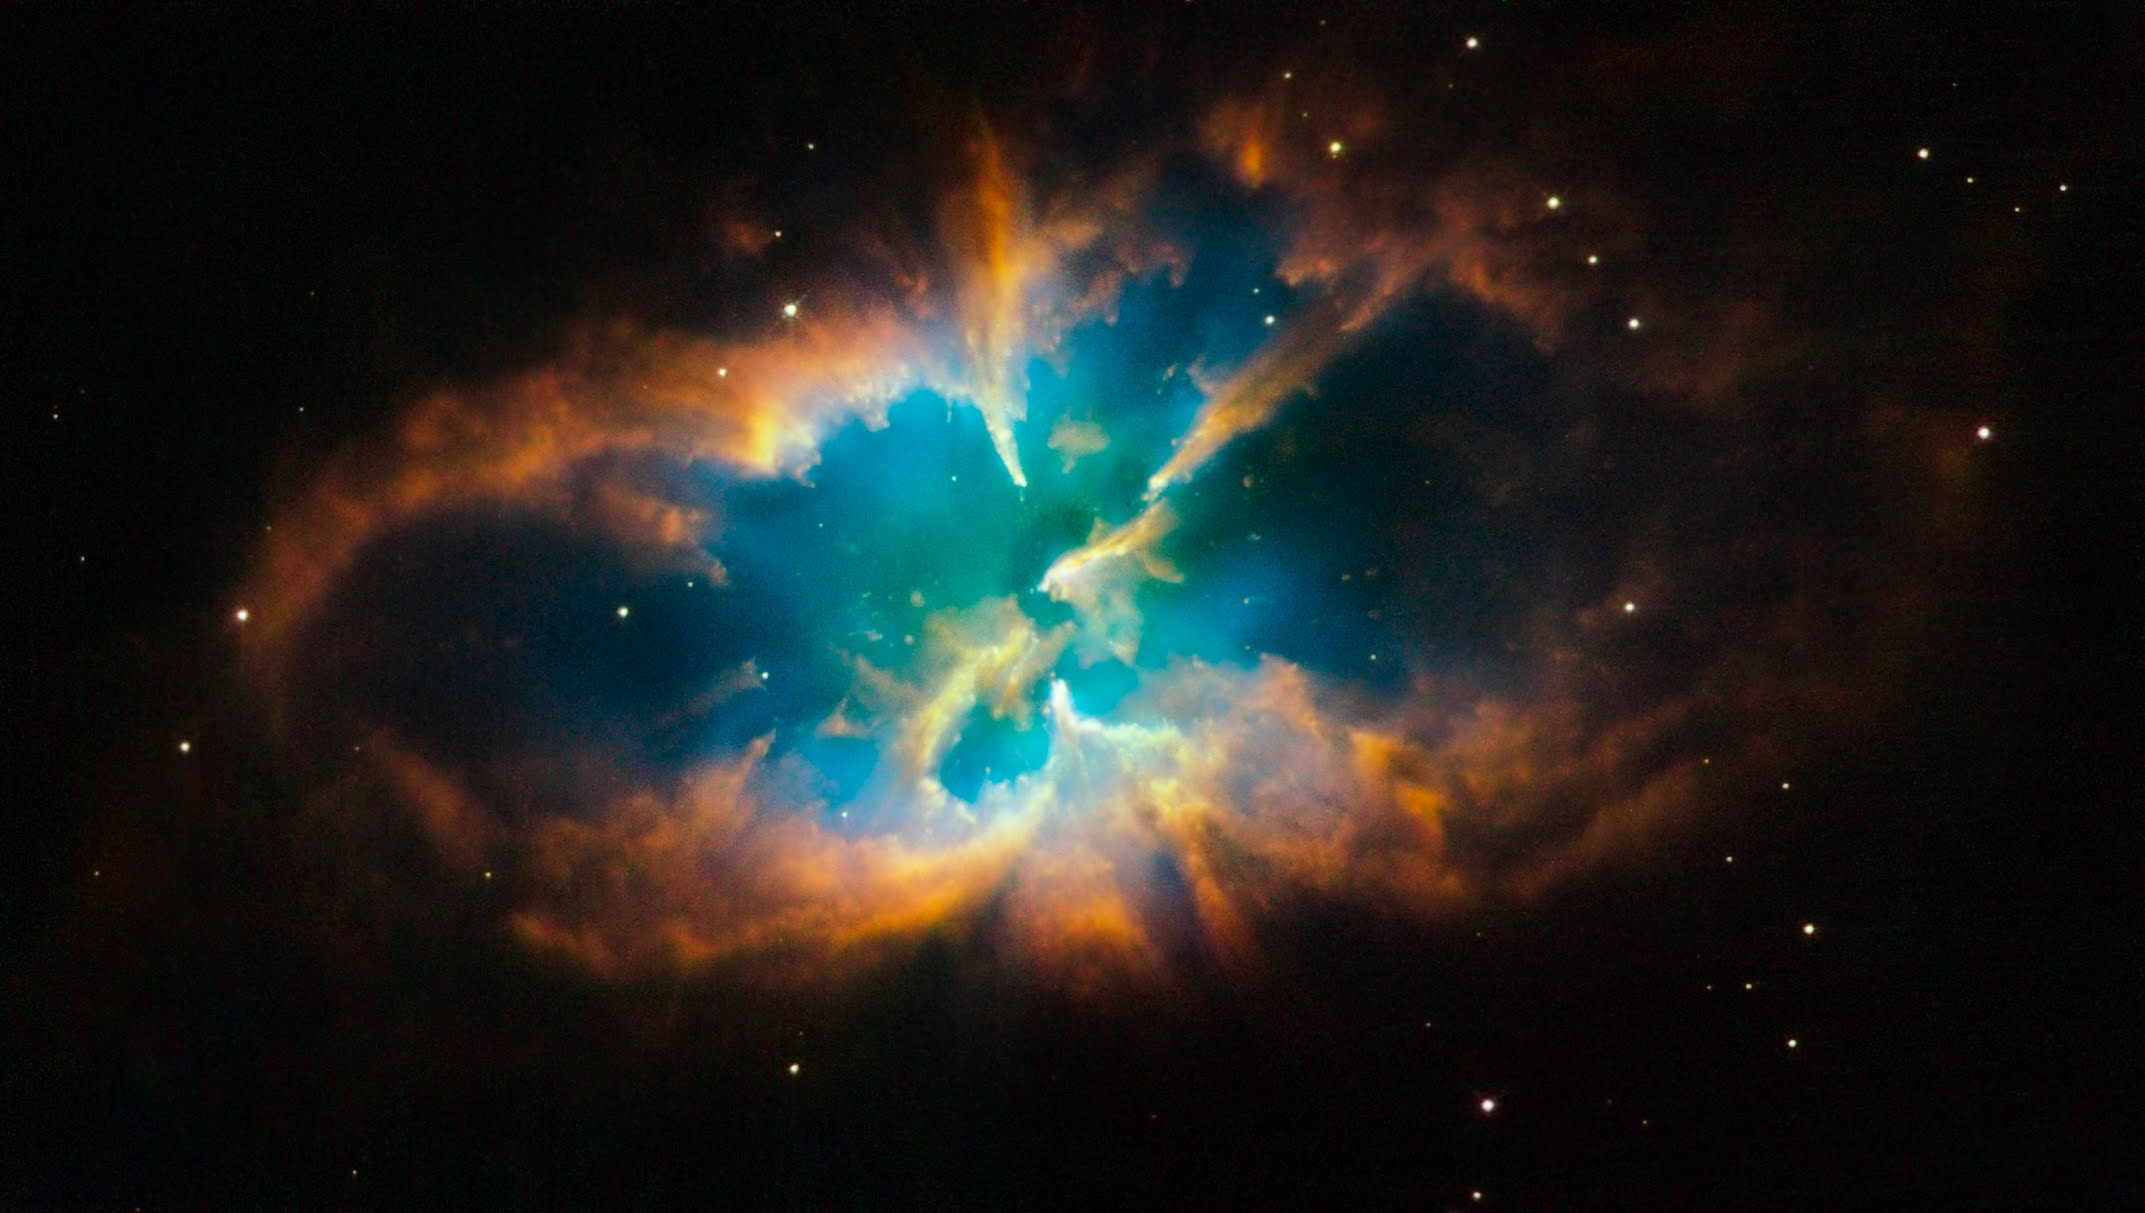 The Wonders of Space - Amazing Hubble instellar images - sit back ...